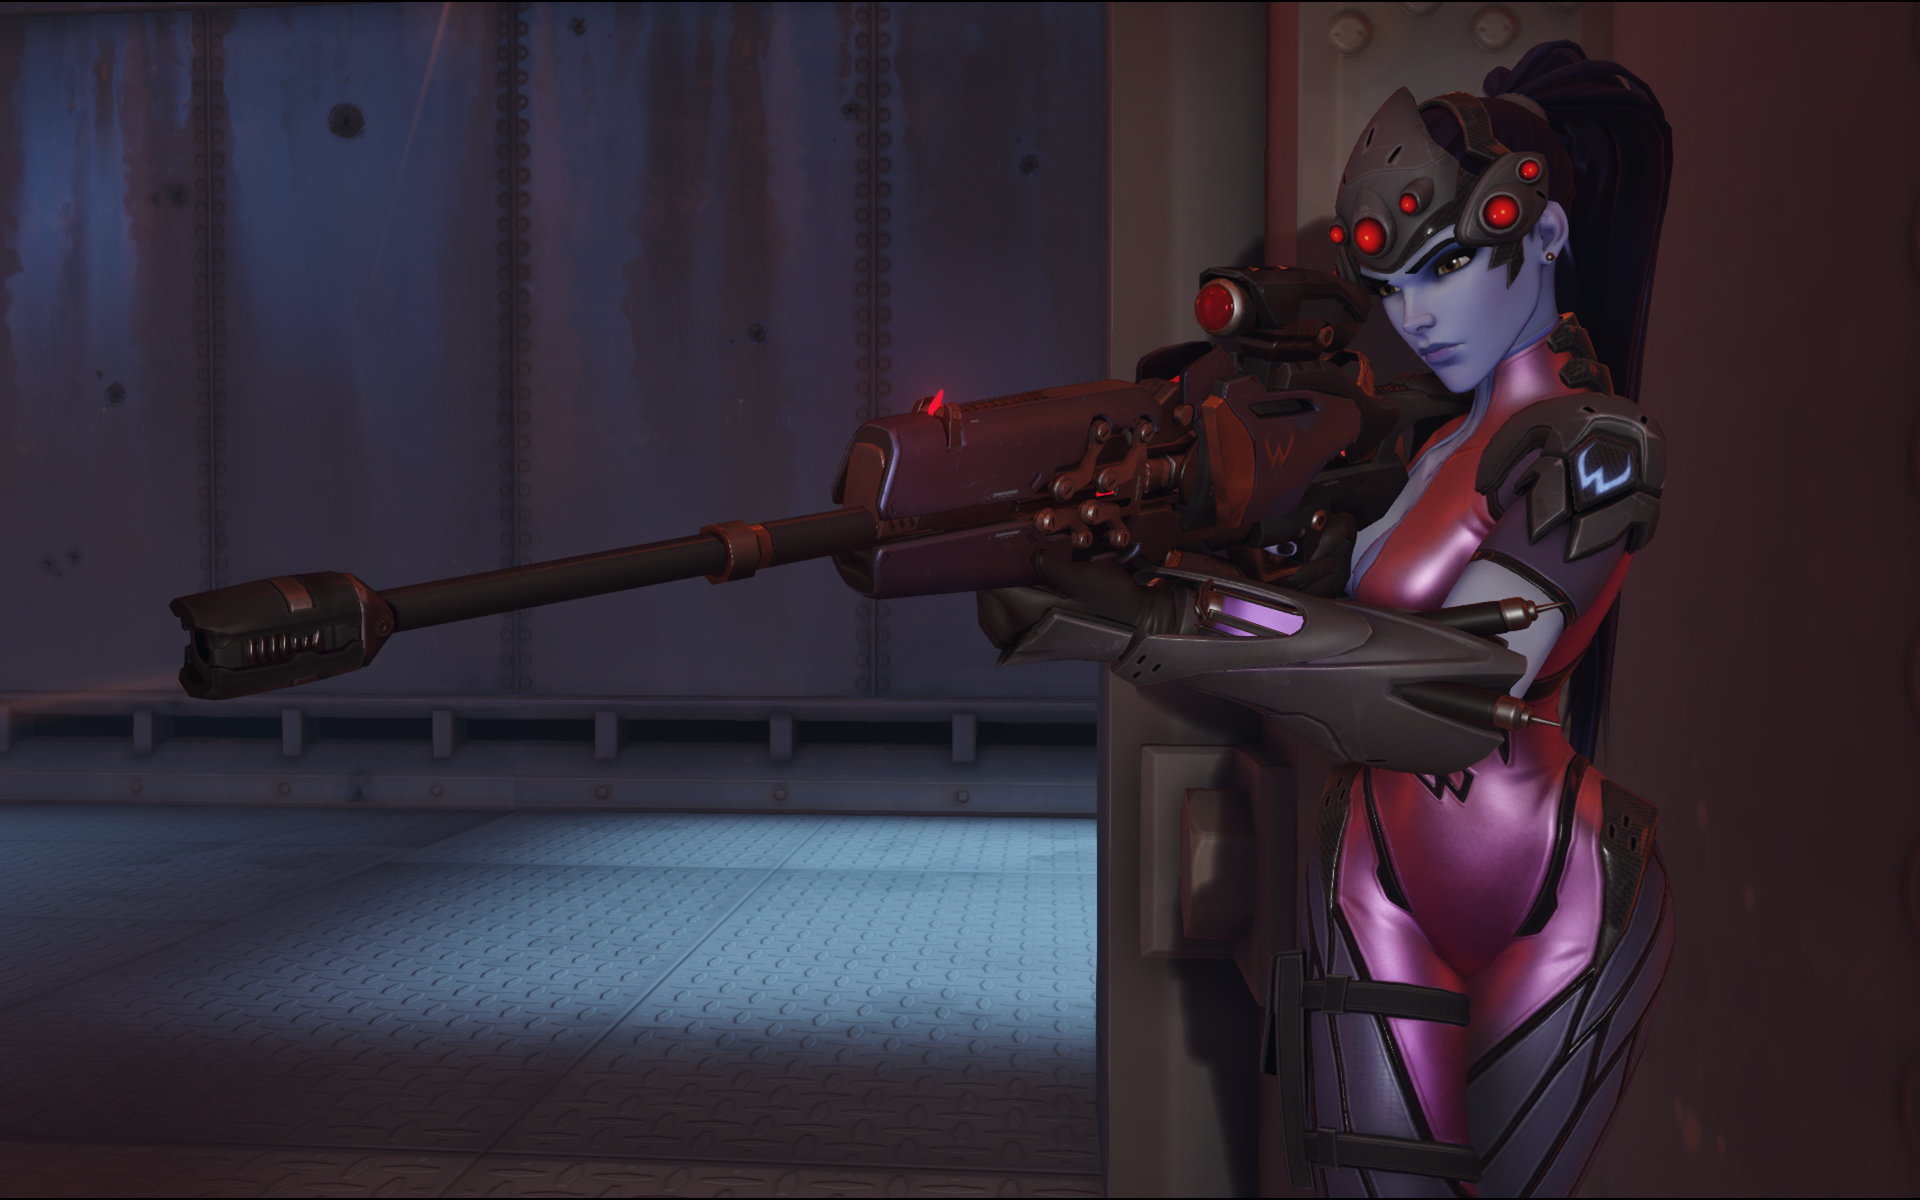 REVEALED: New Cinematic for “Overwatch”